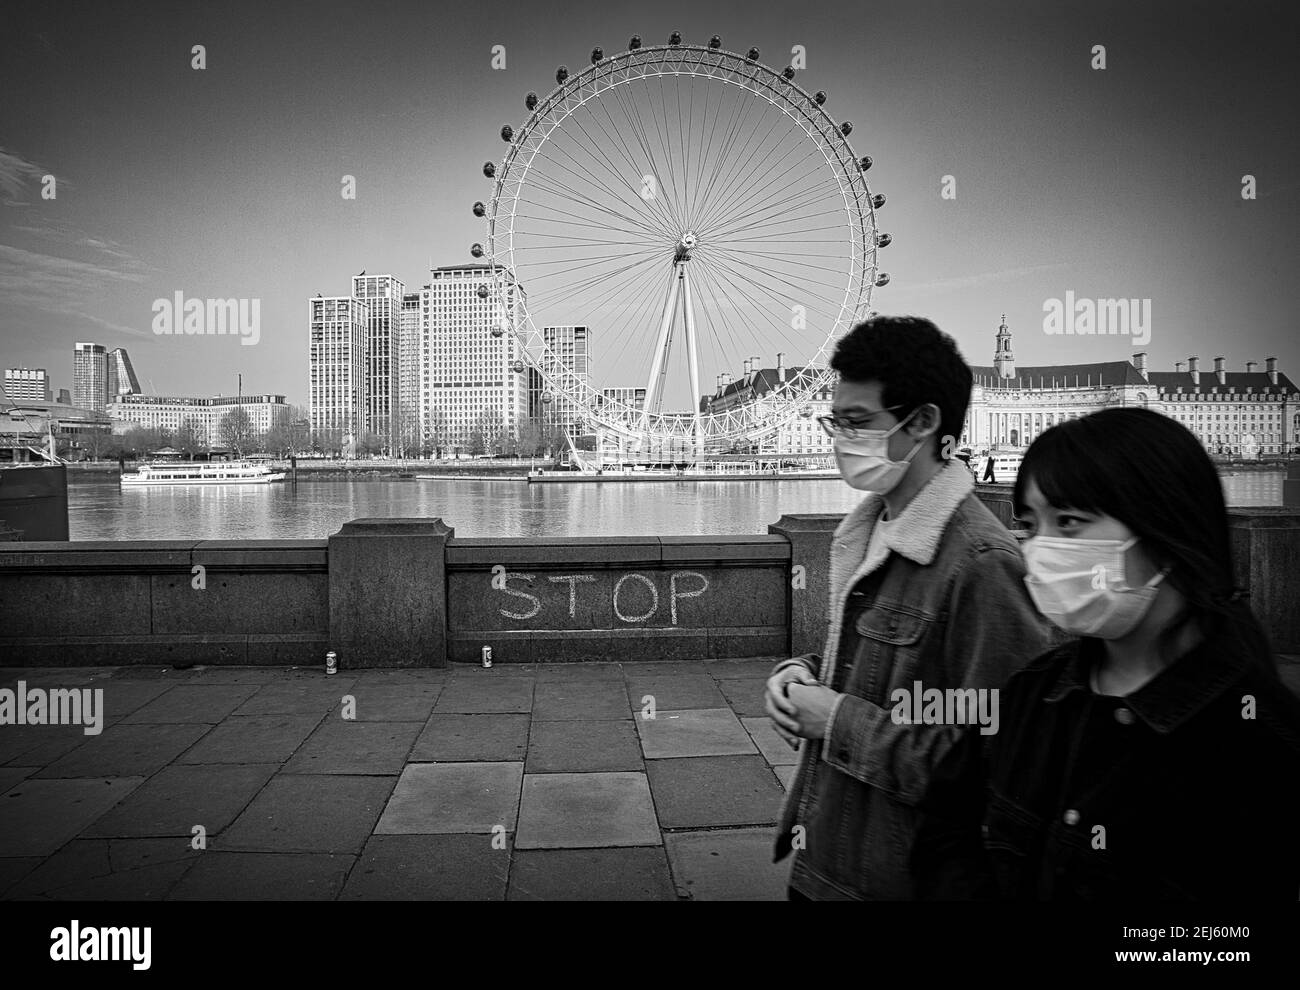 GREAT BRITAIN / England / London / Business takes a hit as tourists shun the UK .Couple wearing a face masks as theey walk along the Thames embankment. Stock Photo